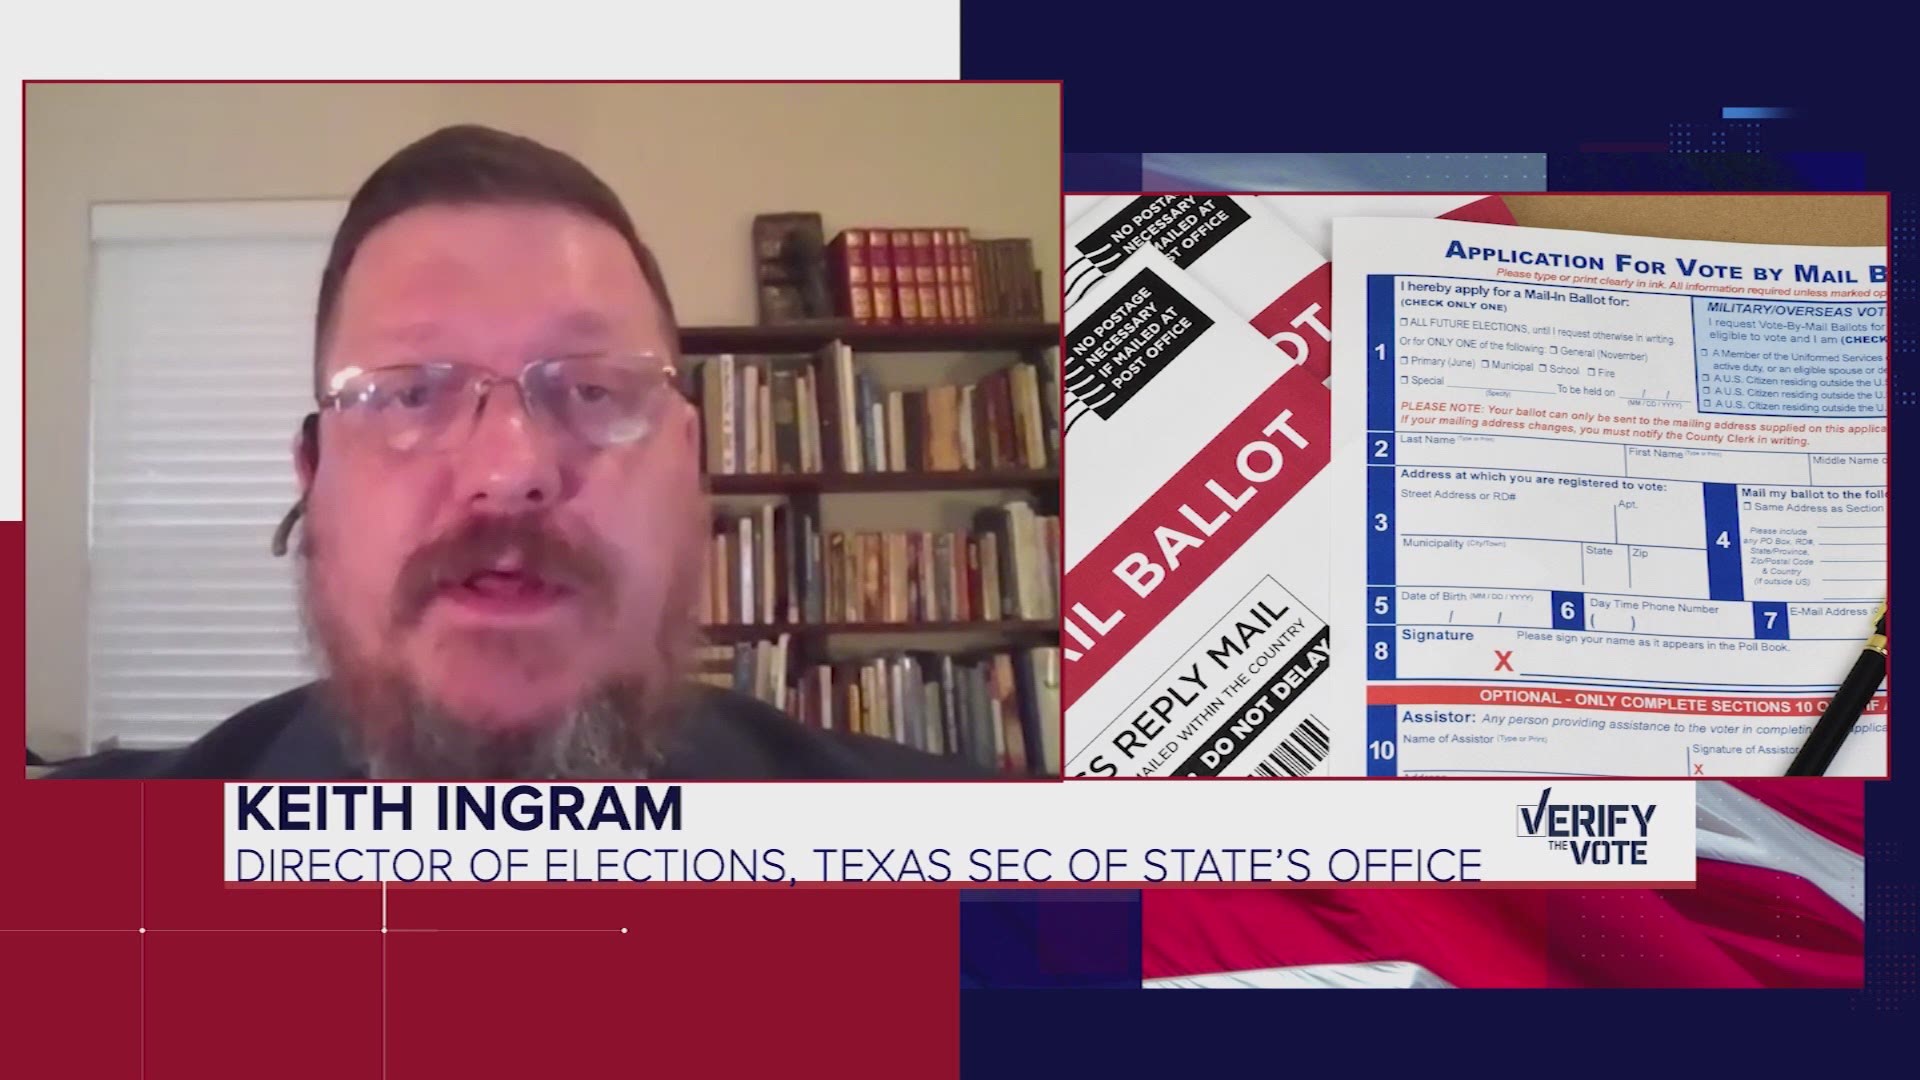 We went to the Director of Elections for the Texas Secretary of State’s Office, Keith Ingram, to get answers to your questions about voting deadlines.